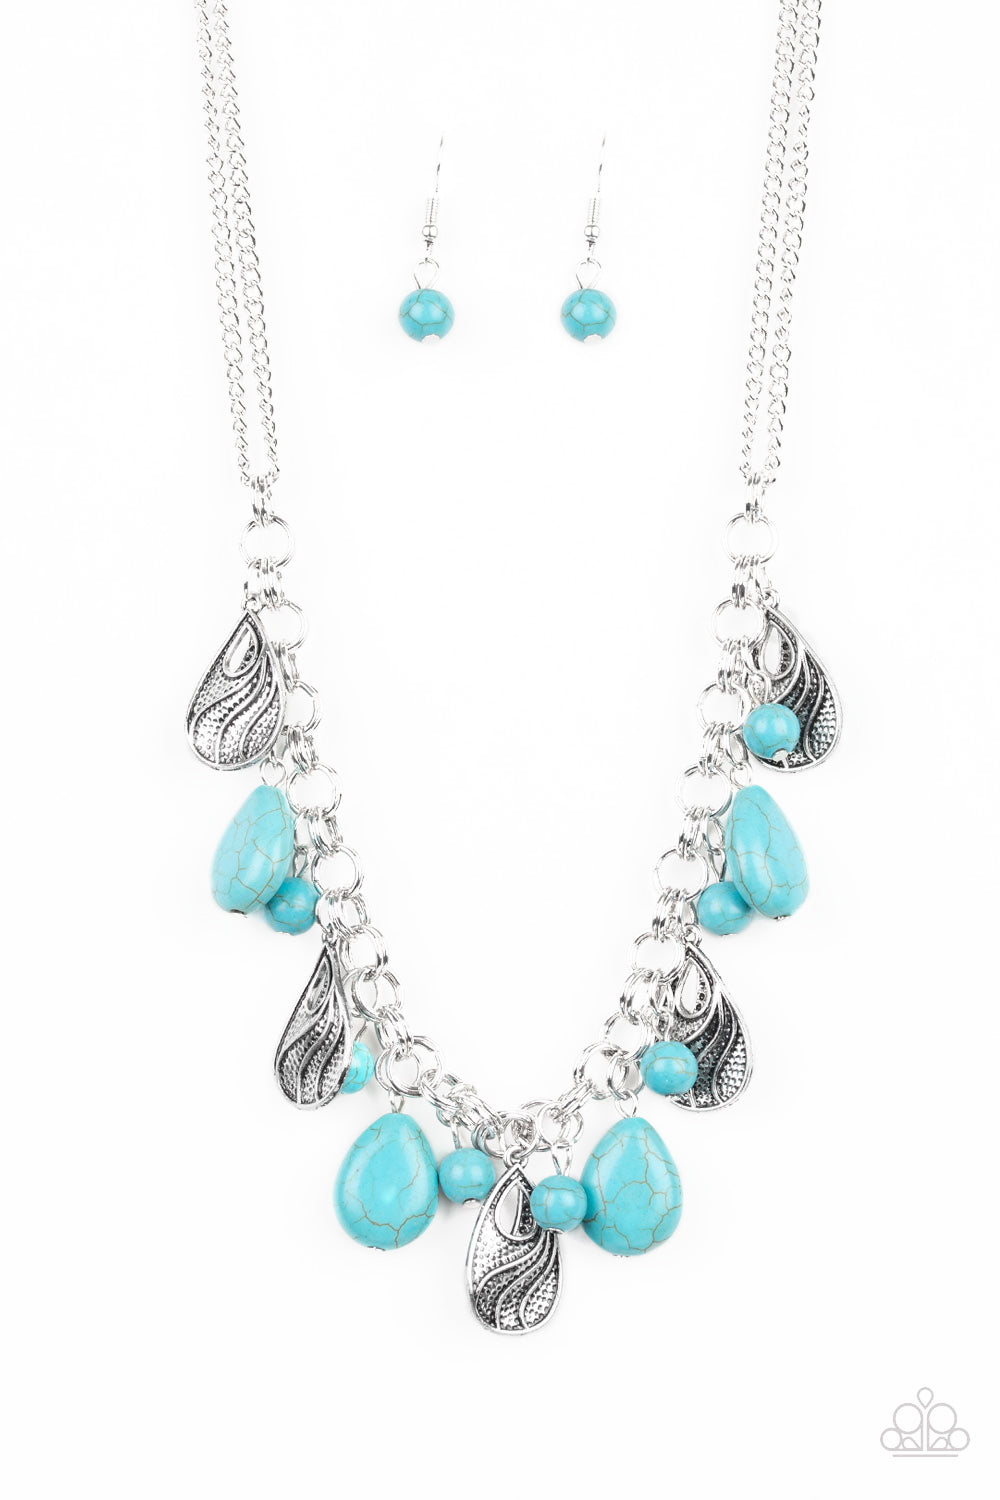 Terra Tranquility Blue Necklace